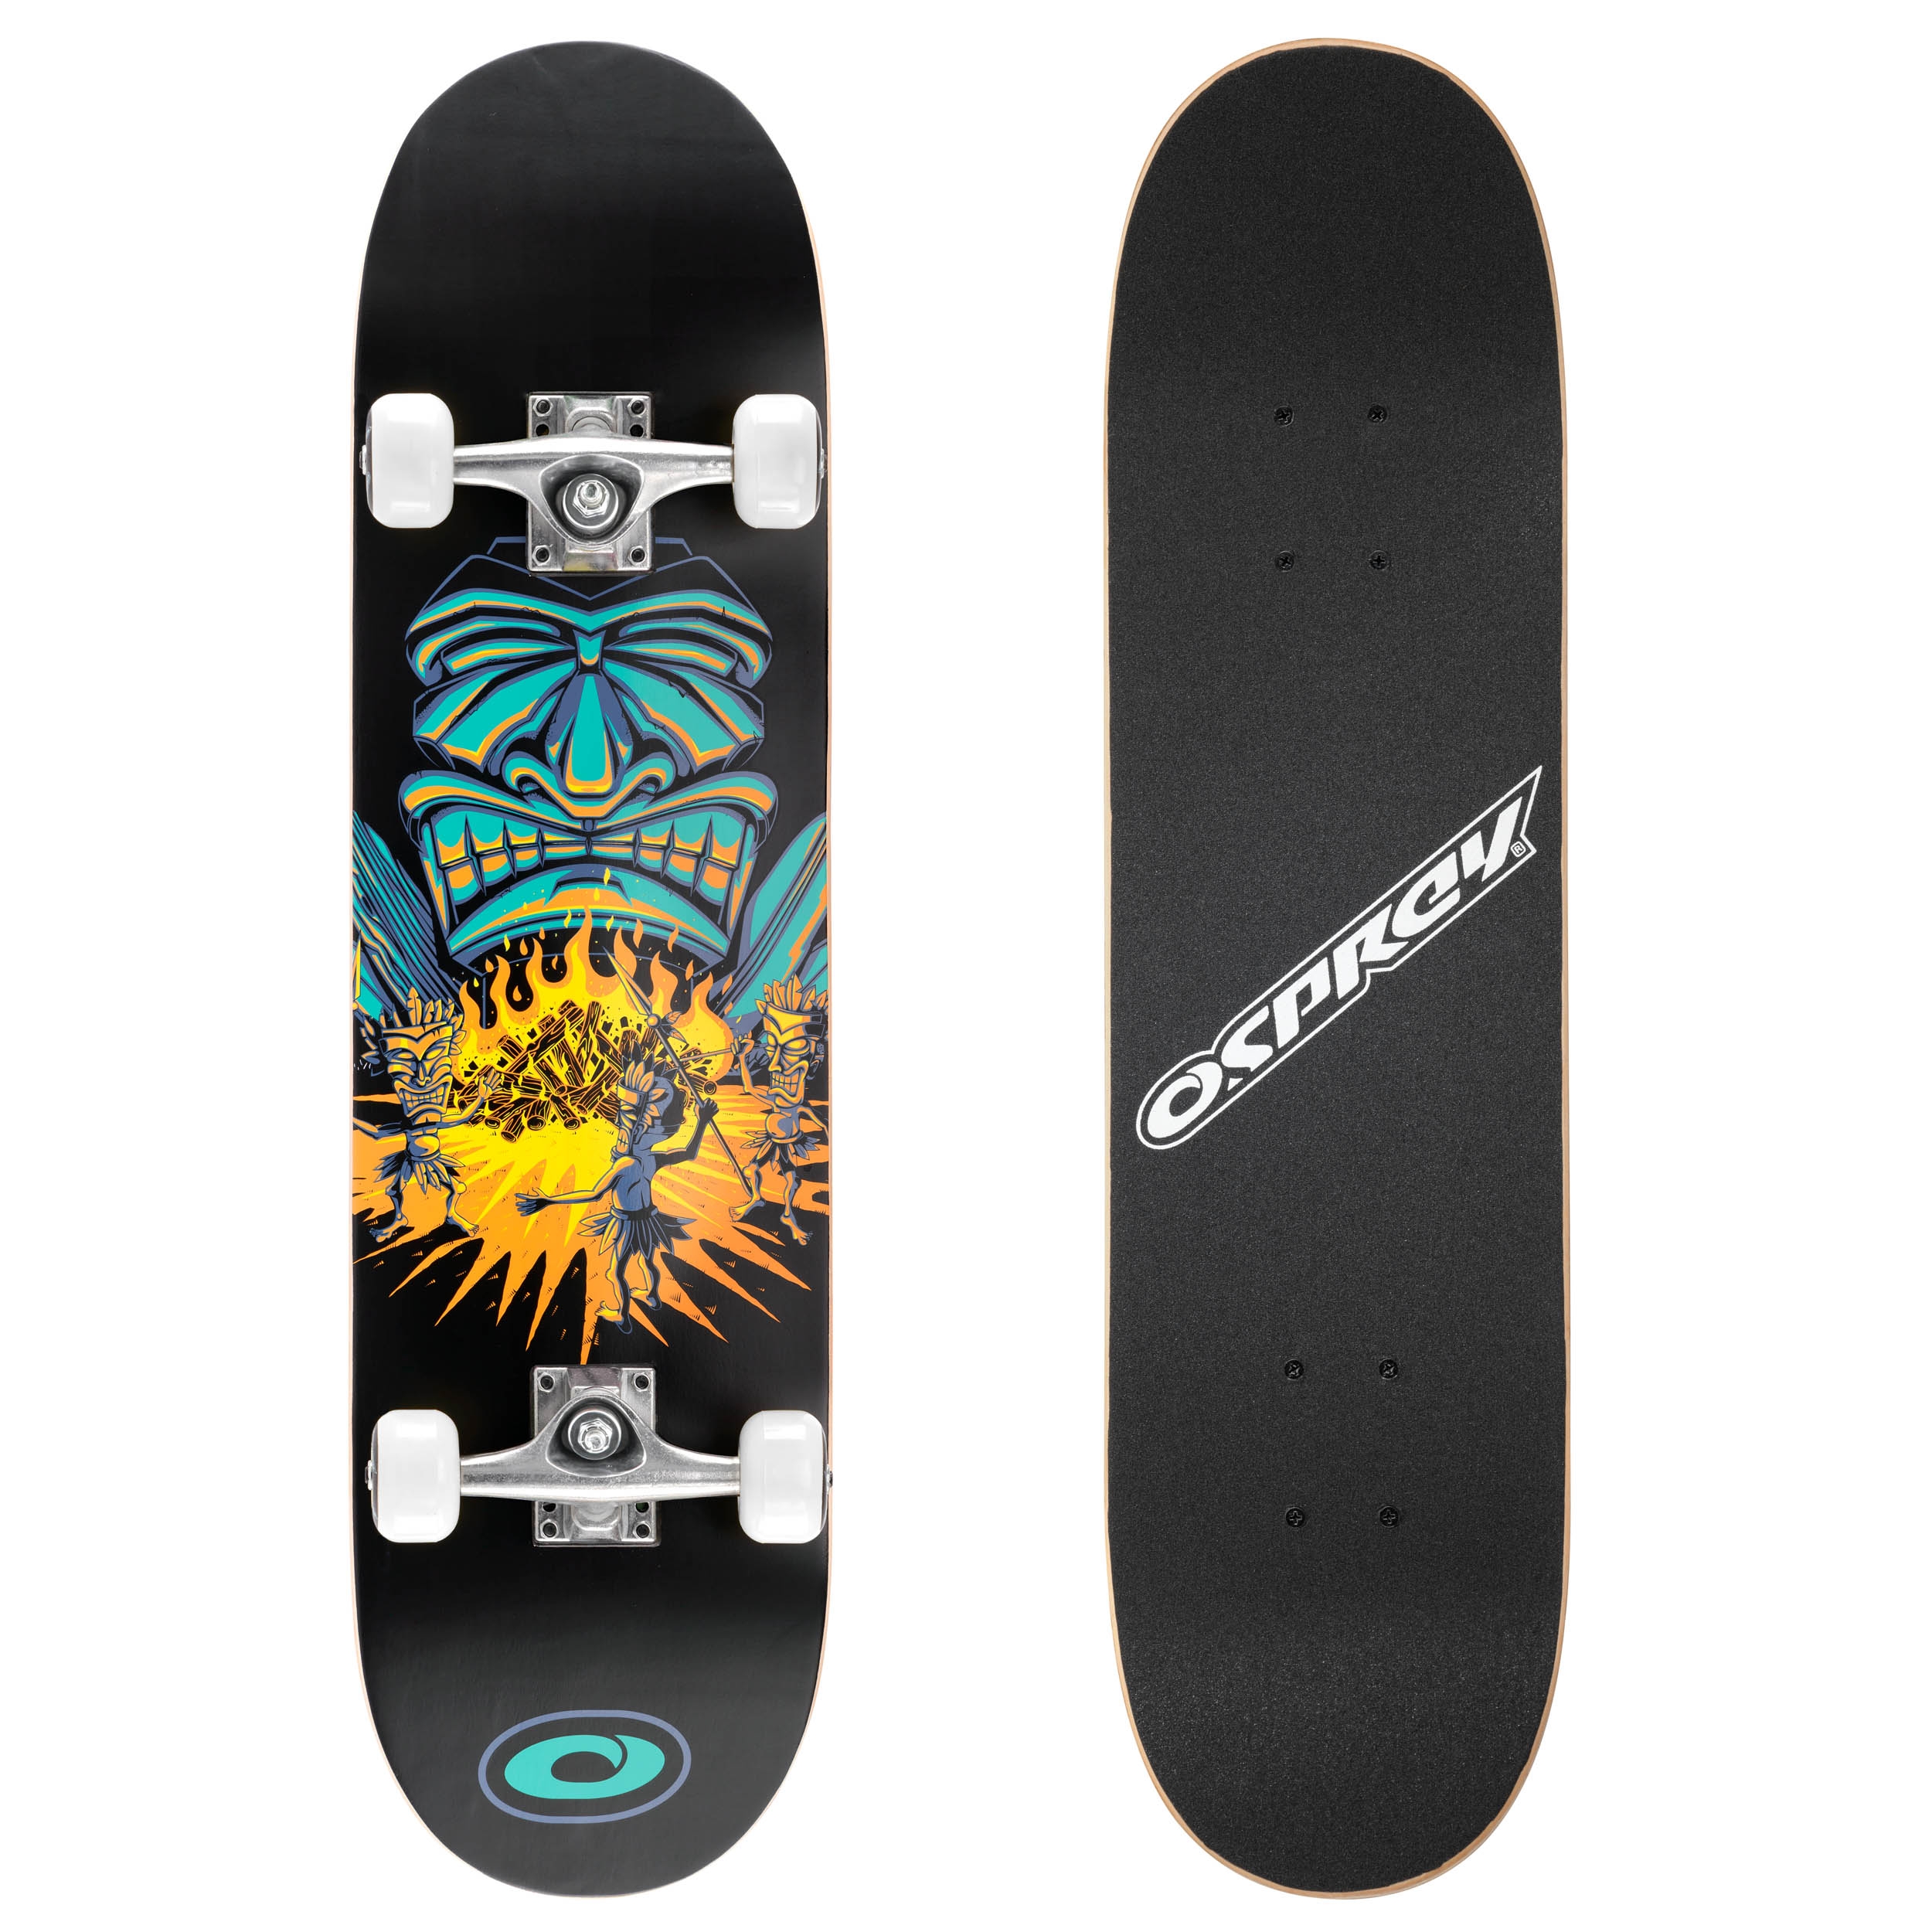 An image of 8" x 31" COMPLETE DOUBLE KICK SKATEBOARD - Savages | Skateboard Promo | Osprey A...